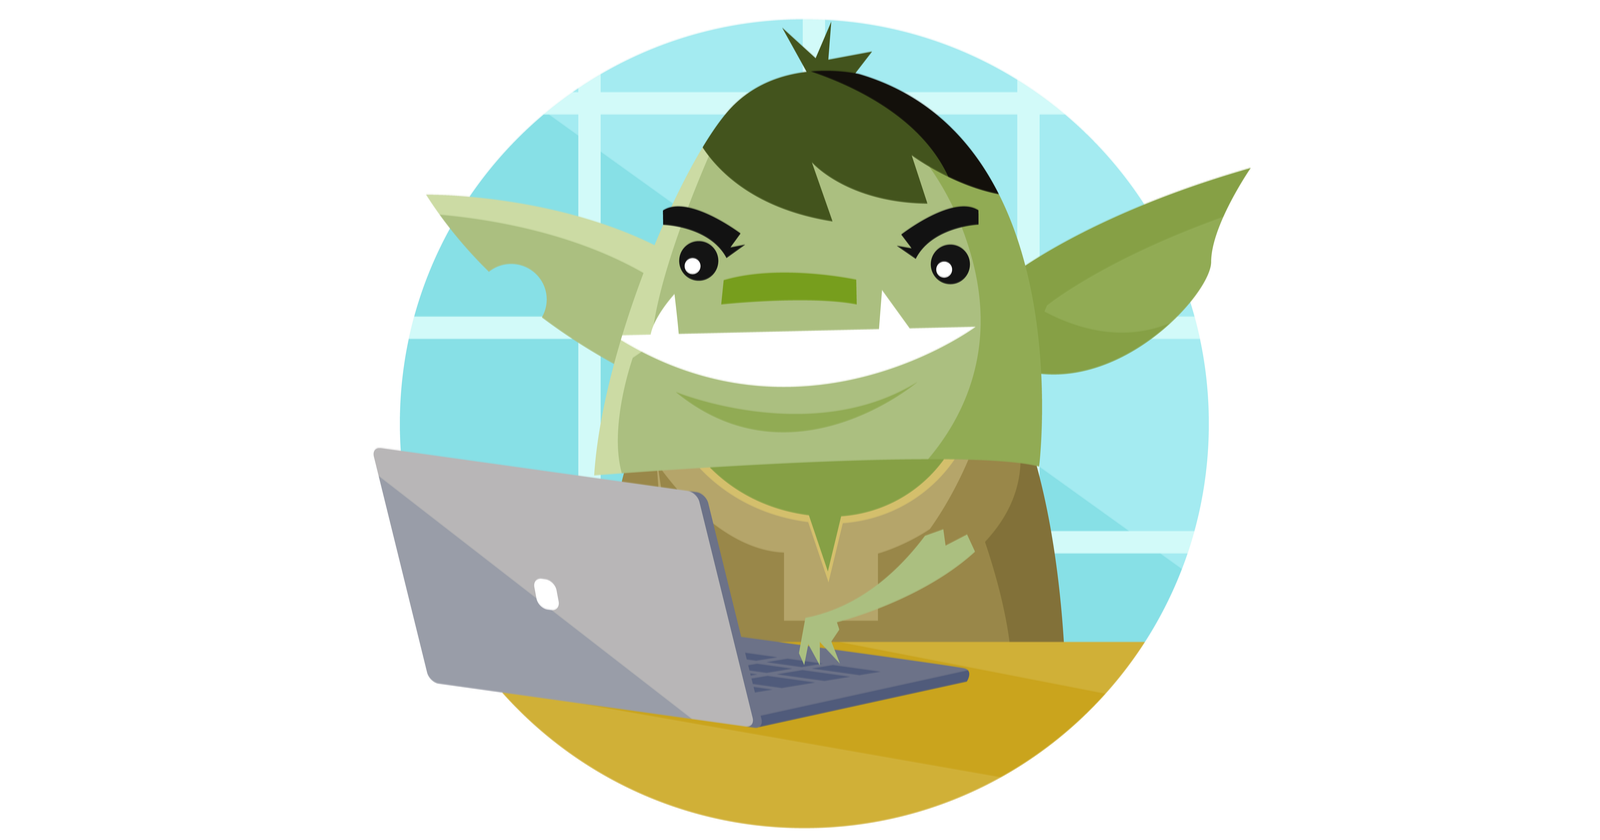 Don't Feed Trolls Royalty-Free Images, Stock Photos & Pictures